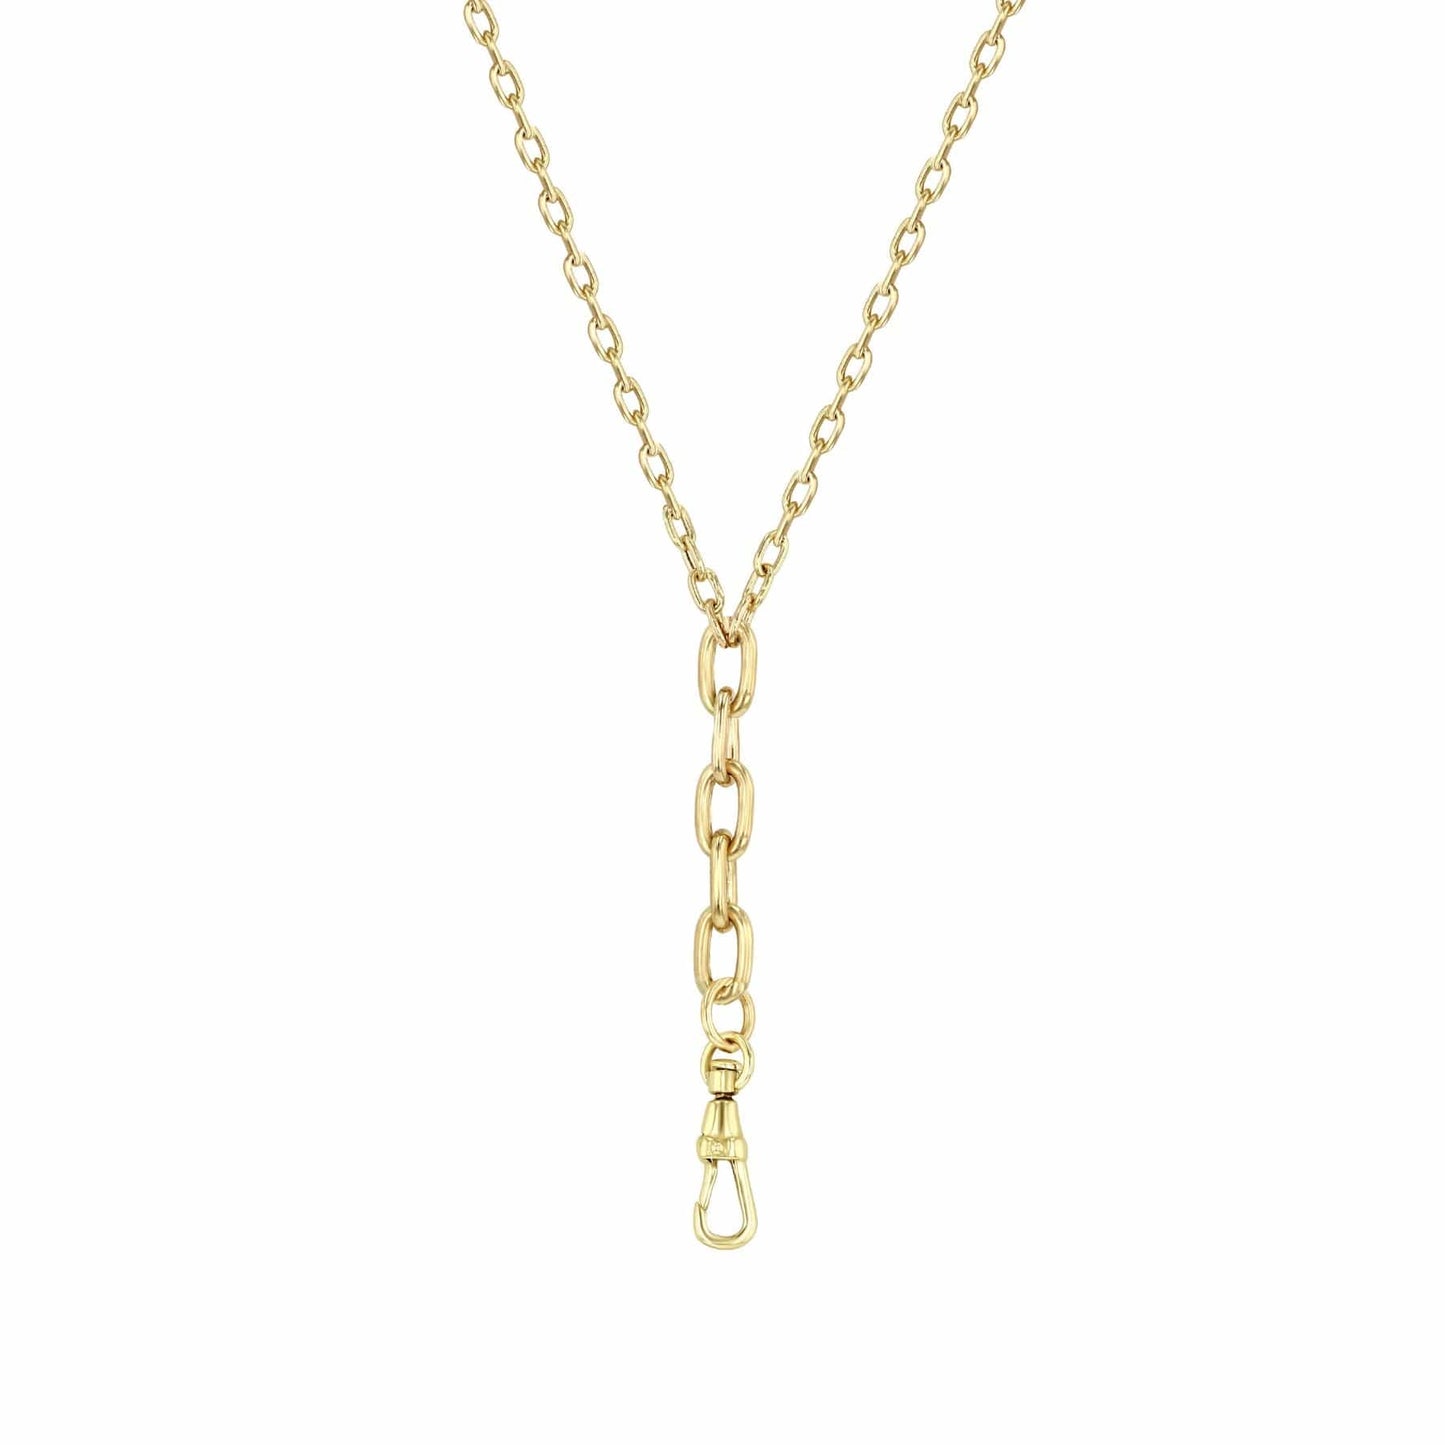 NKL-14K 14k Square Oval Link Chain Lariat Necklace with Fob Clasp